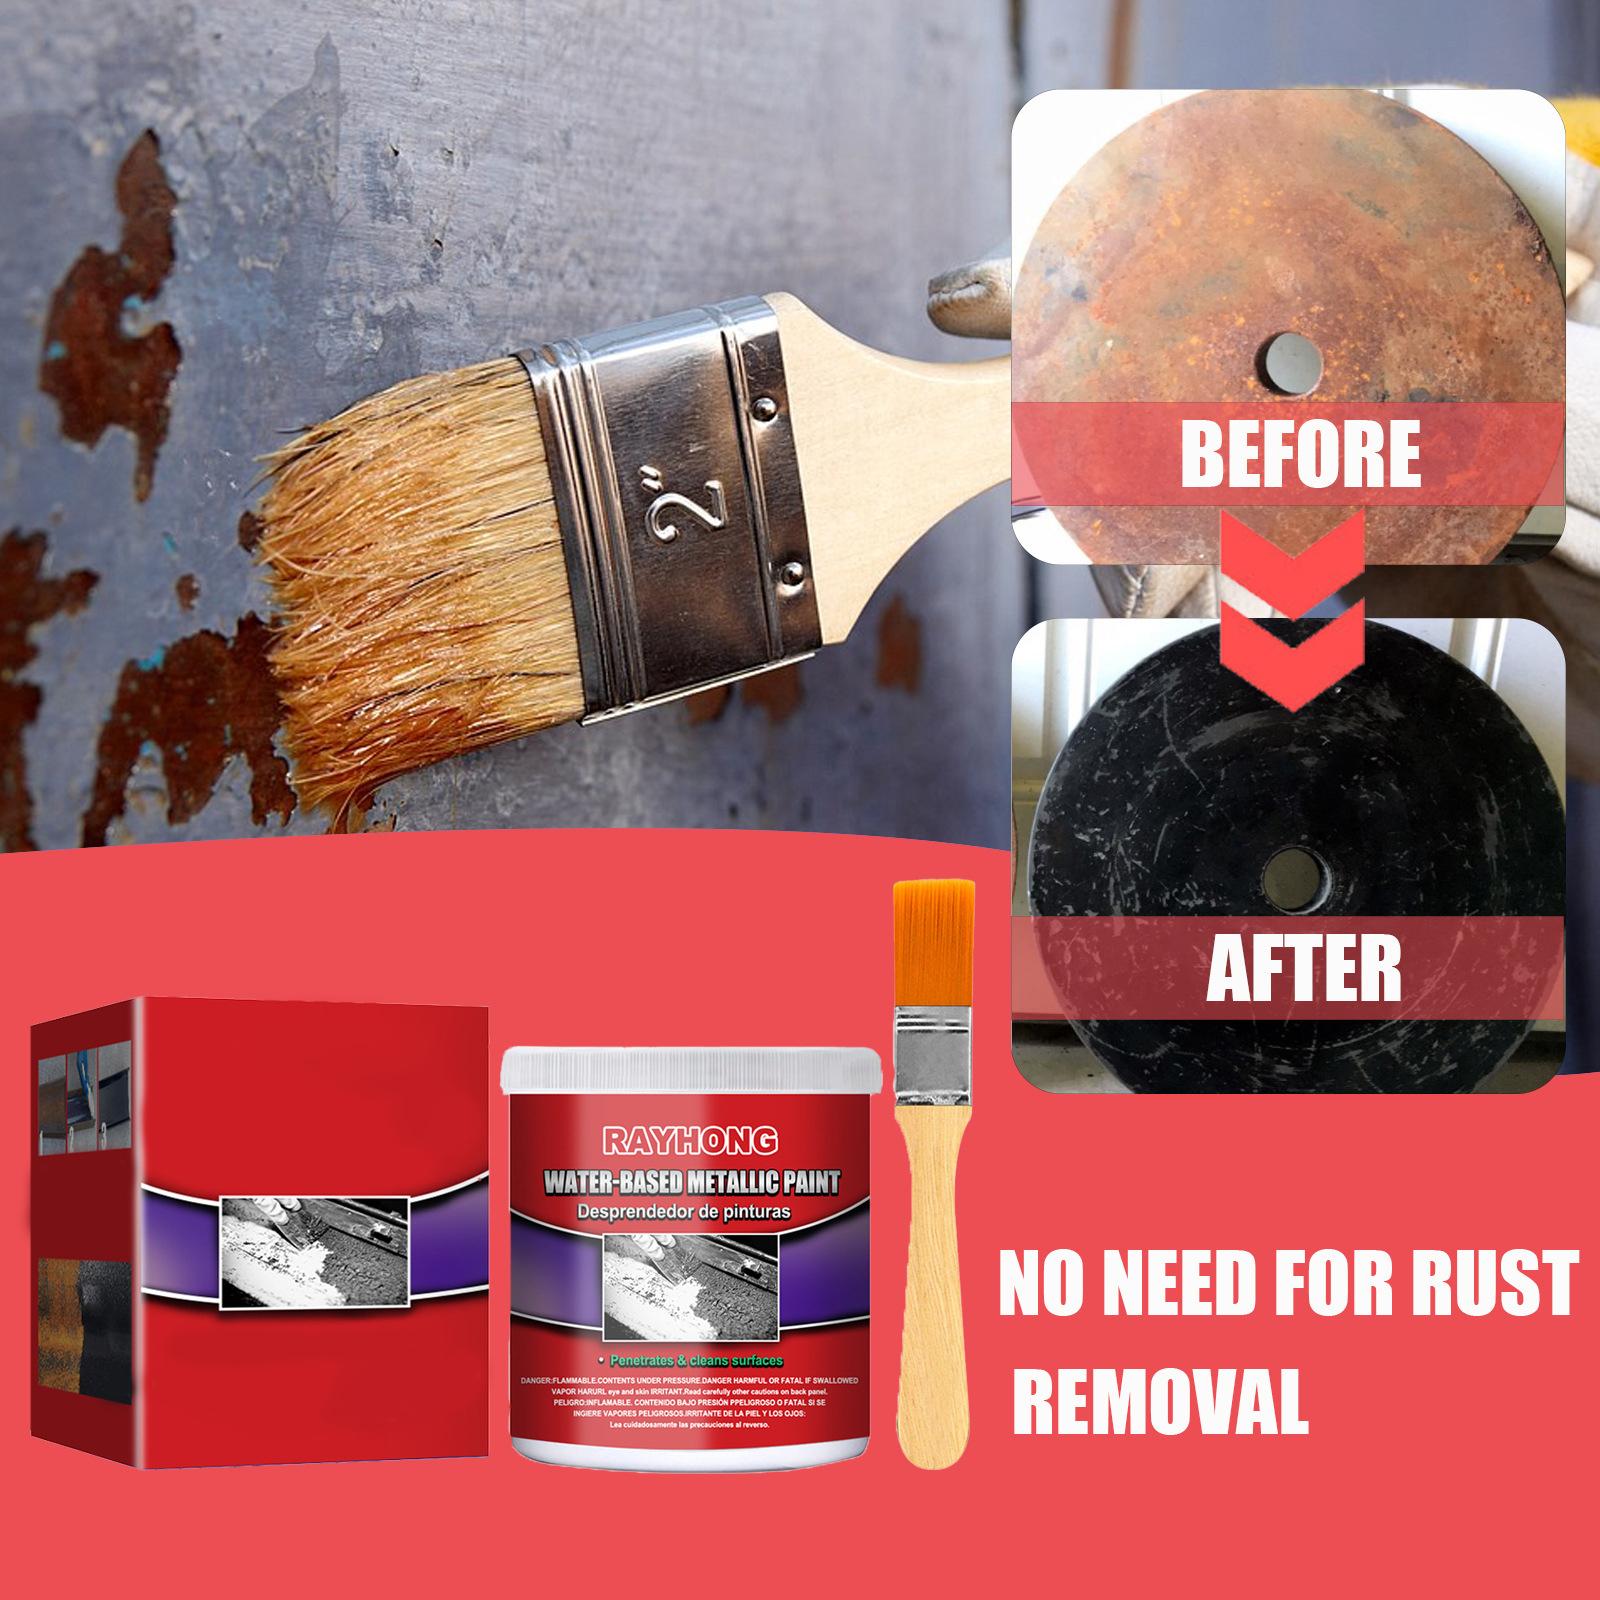 Water-based Metal Rust Remover - Givemethisnow